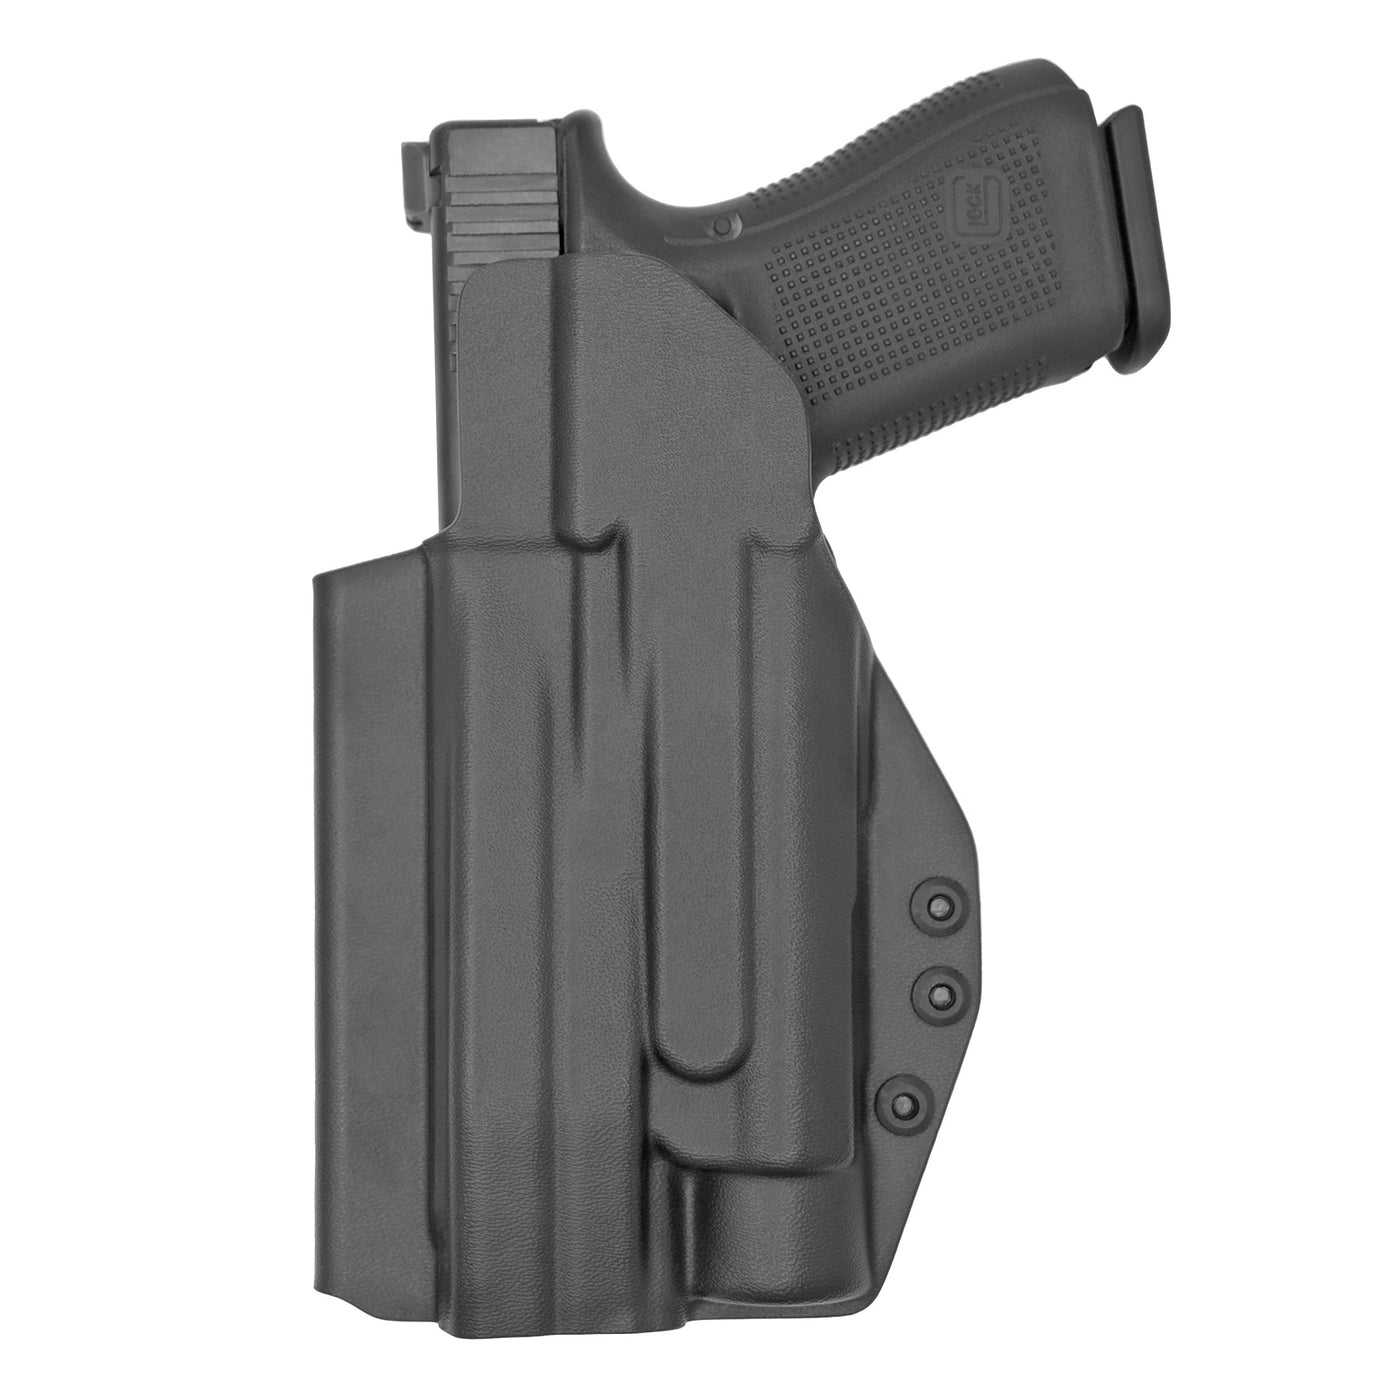 C&G Holsters quickship IWB Tactical CZ P10/c Streamlight TLR-1 in holstered position back view